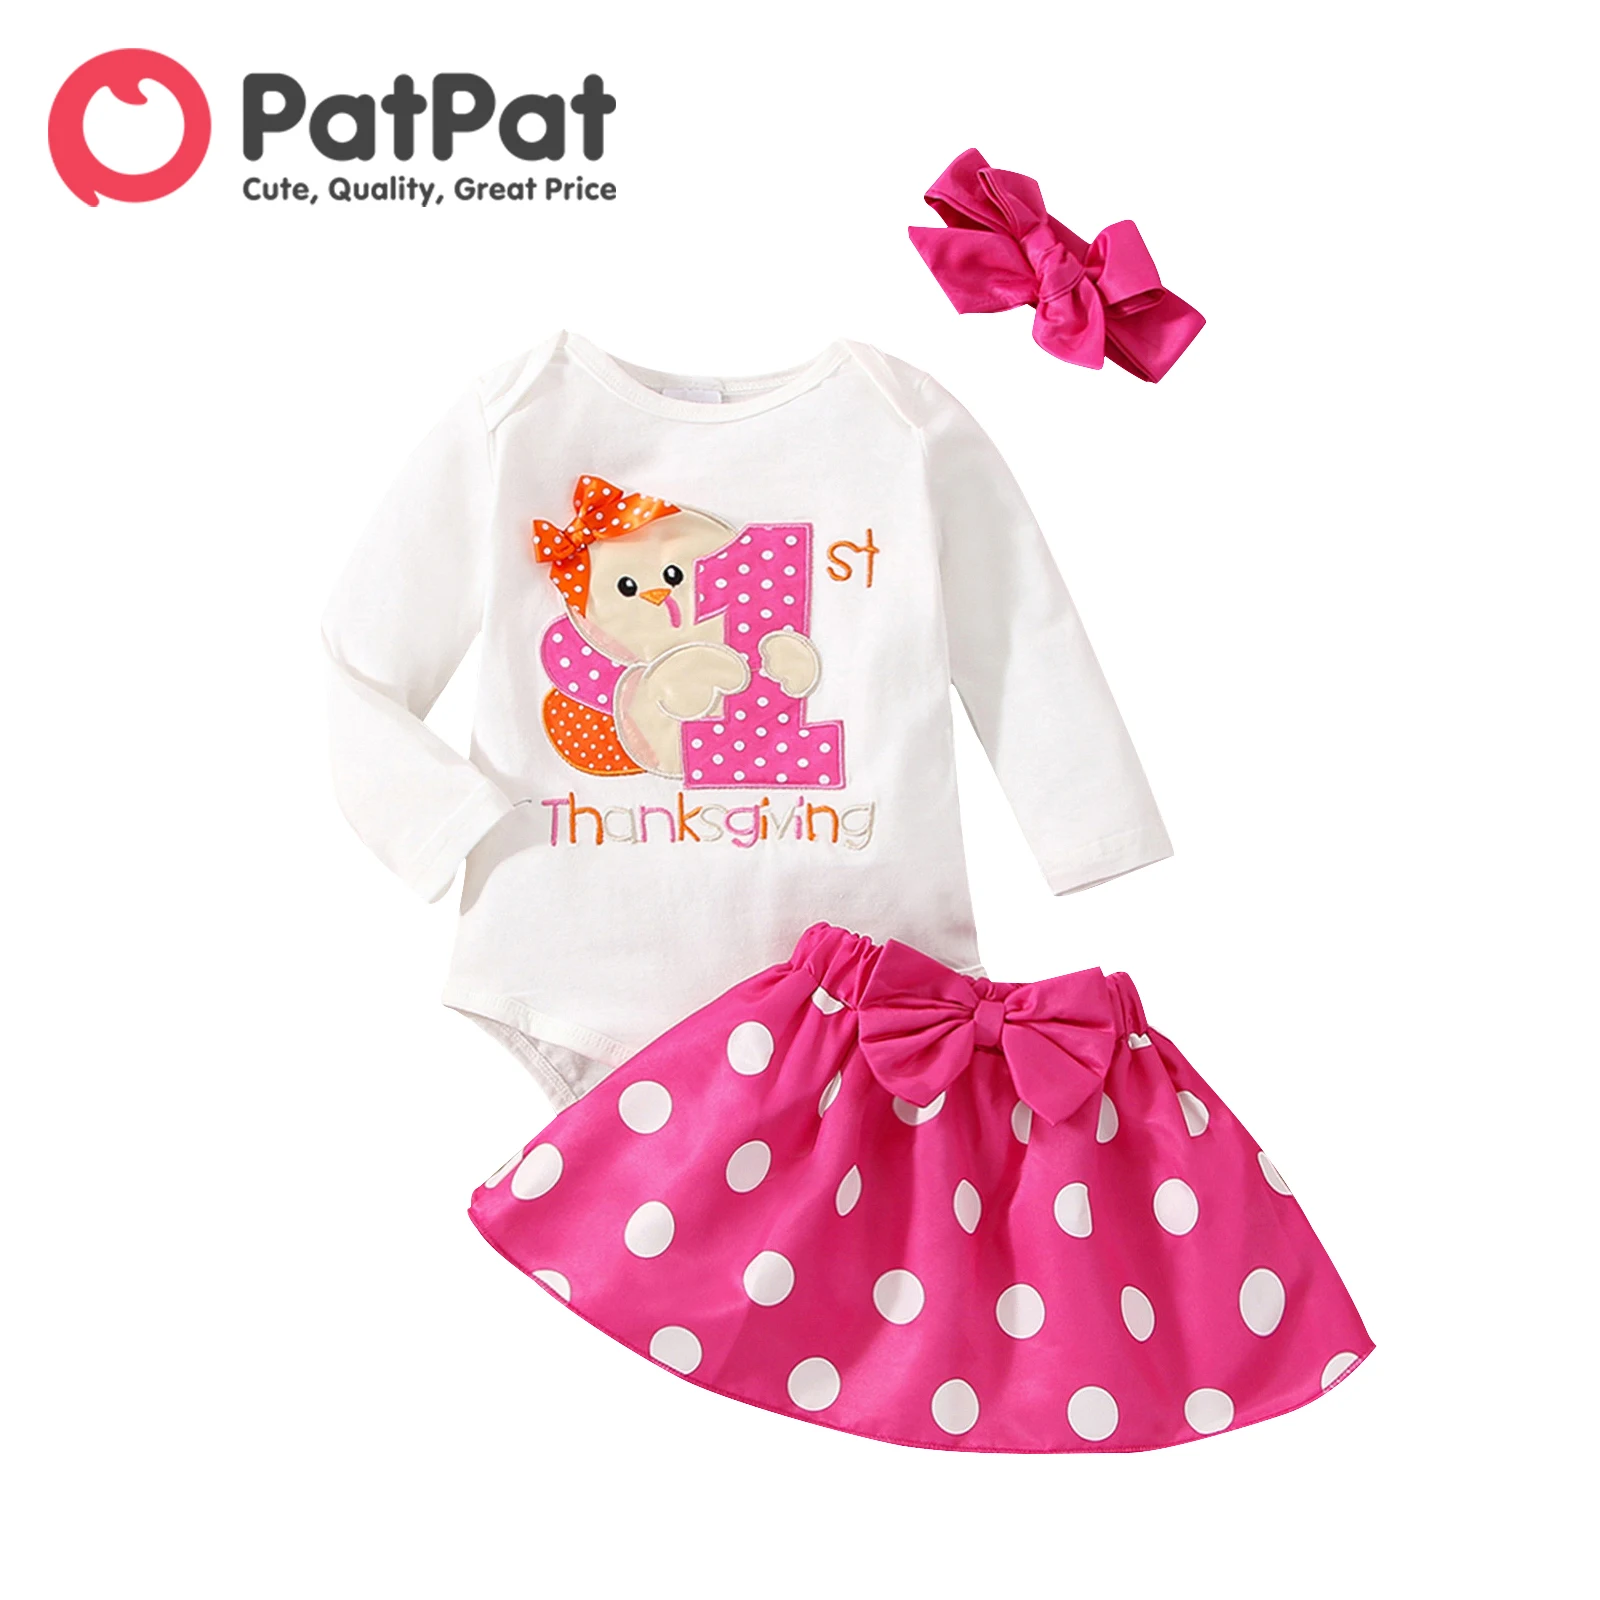 

PatPat Thanksgiving Day Newborn Baby Girl Clothes Long-sleeve Turkey Embroidered Romper and Polka Skirt with Headband Set